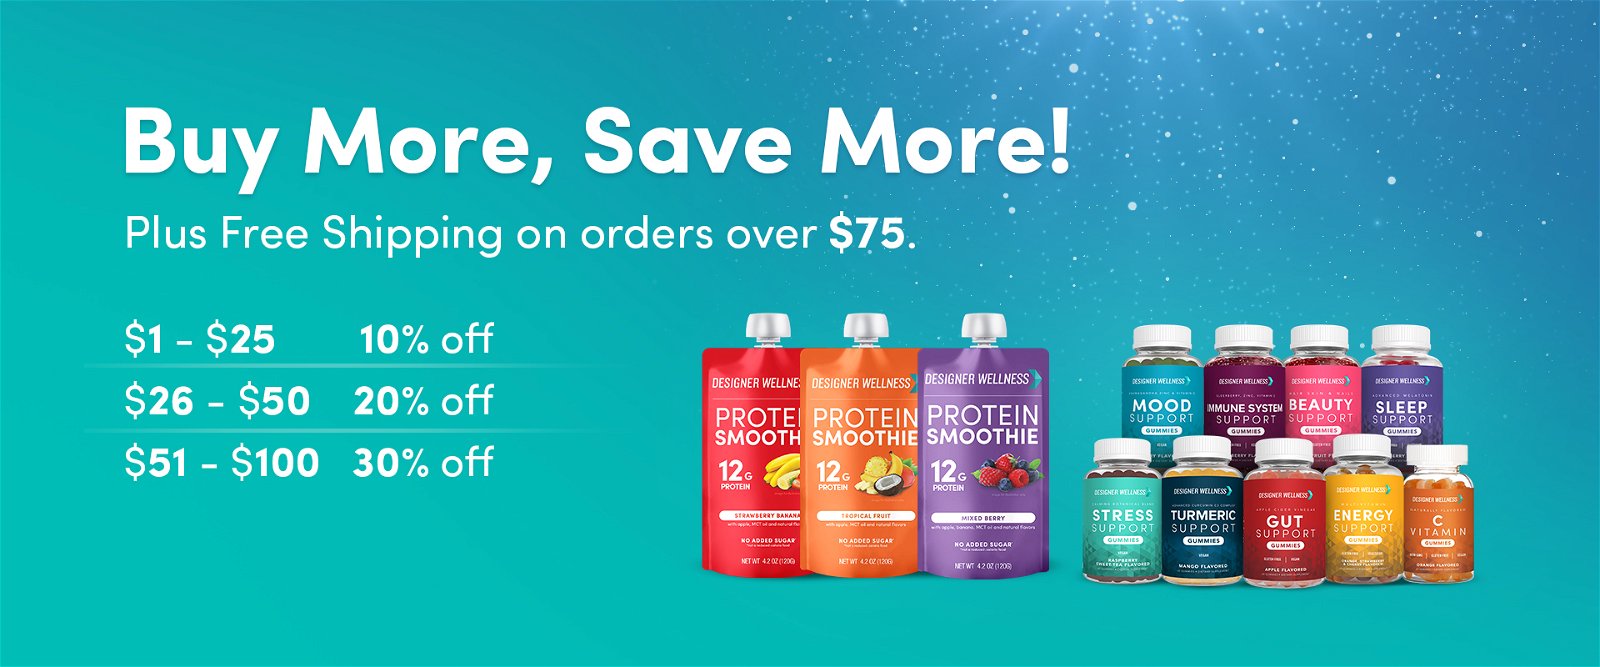 Buy More, Save More! Plus Free Shipping on orders over $75!